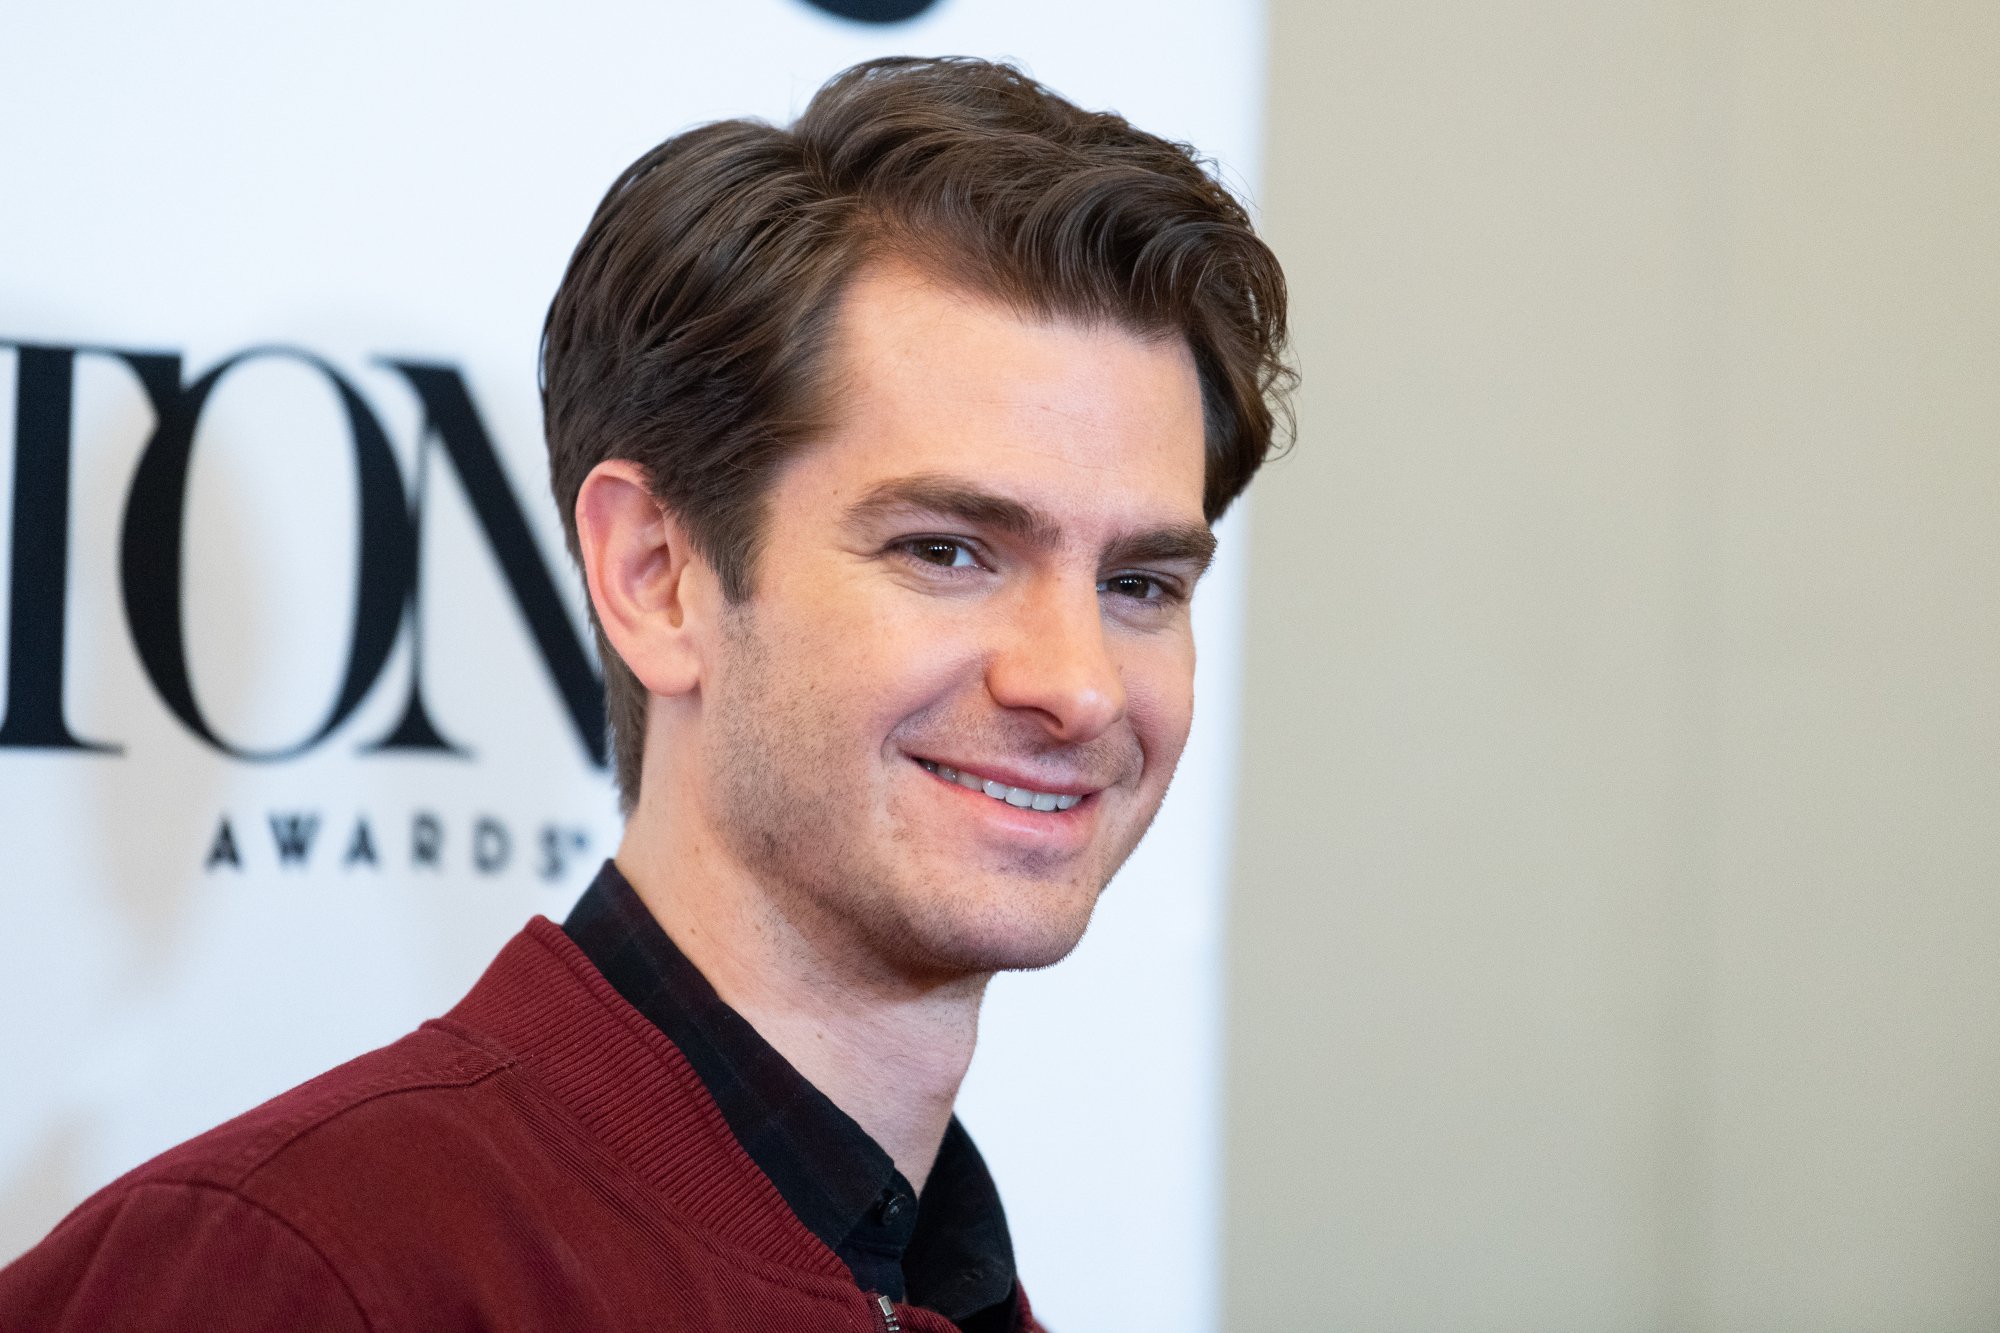 'The Amazing Spider-Man' actor Andrew Garfield. He's wearing a red jacket and black shirt, and he's smiling at the camera. His brown hair is slicked to the side.